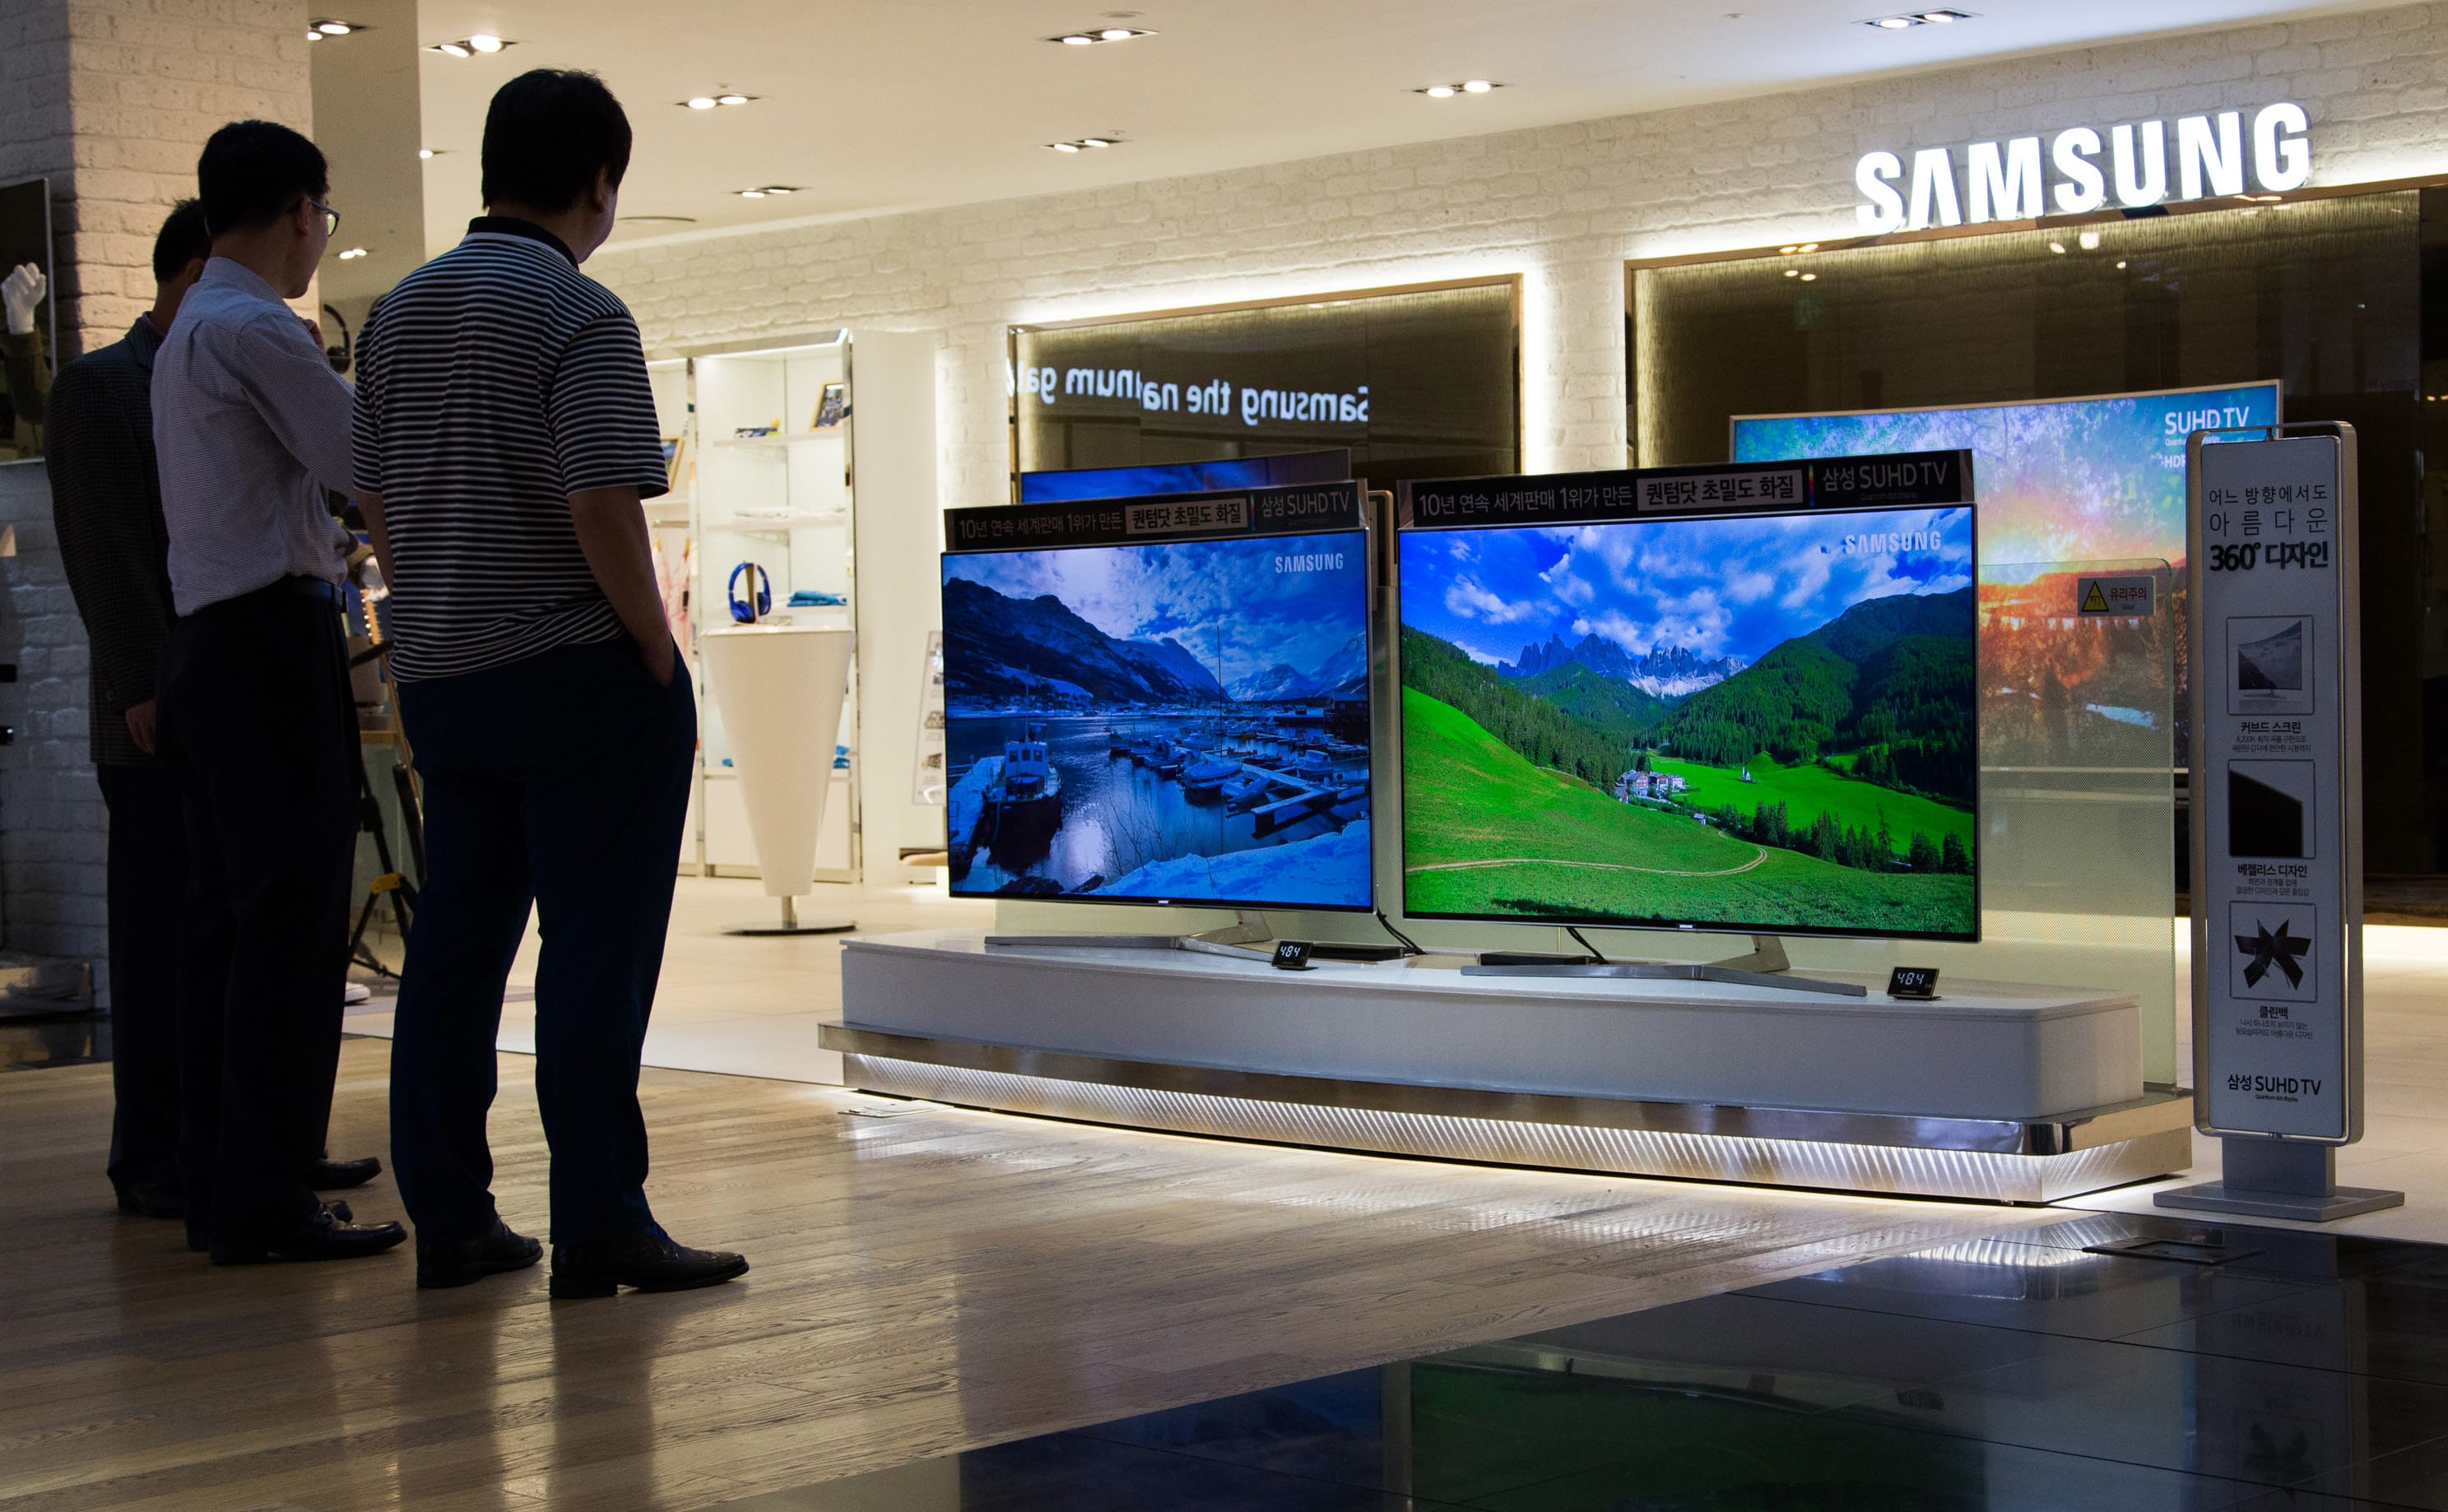 TCL Launches 48 1080P LED HDTV at Sam's Club